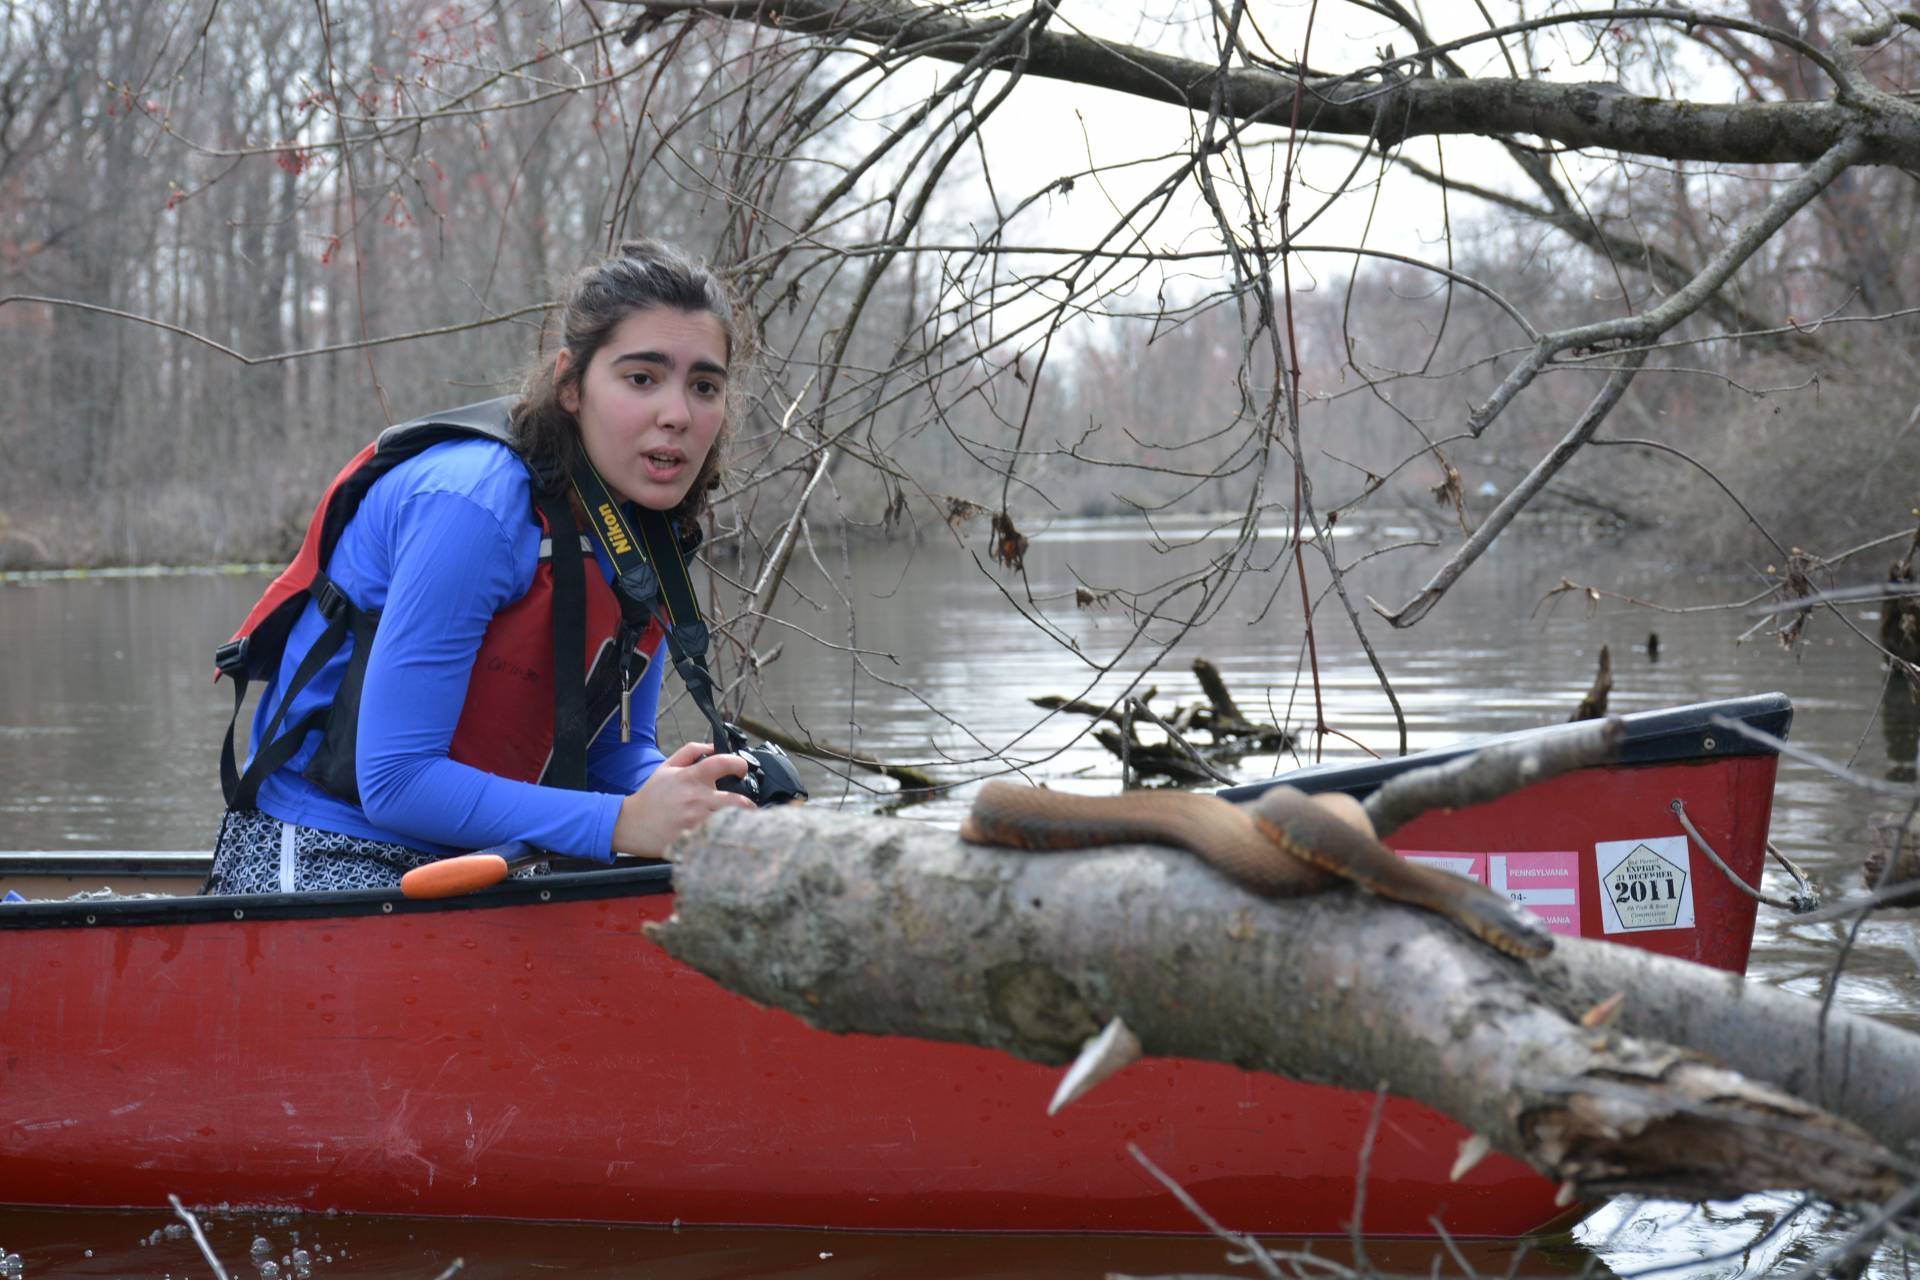 A student in a canoe encounters a snake on a branch